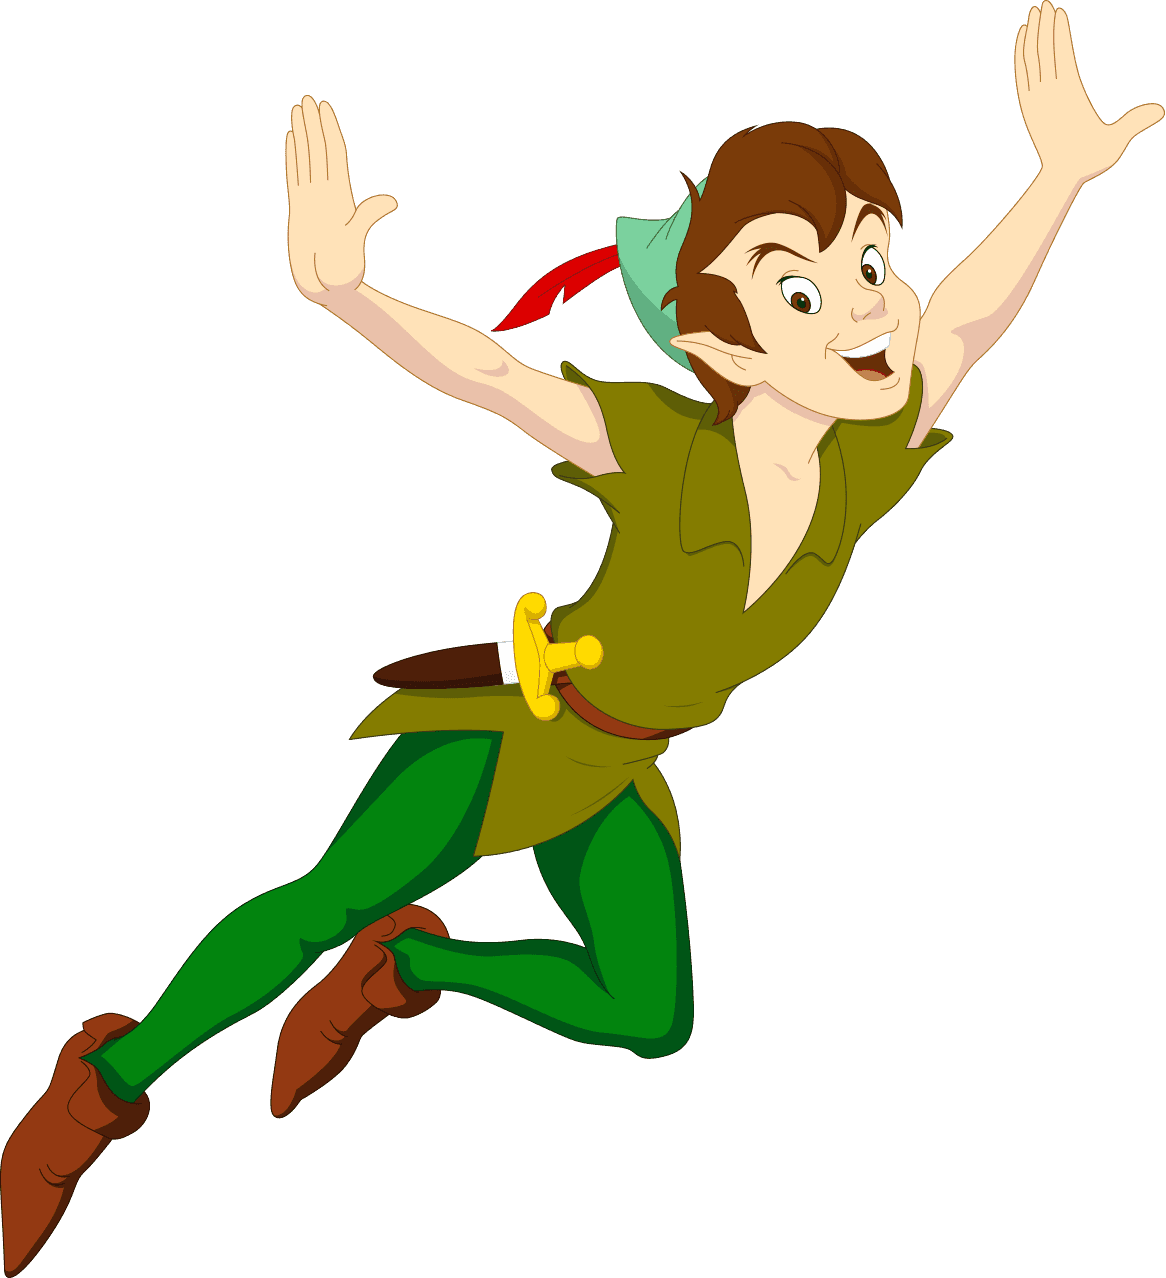 [100+] Peter Pan Pictures | Wallpapers.com